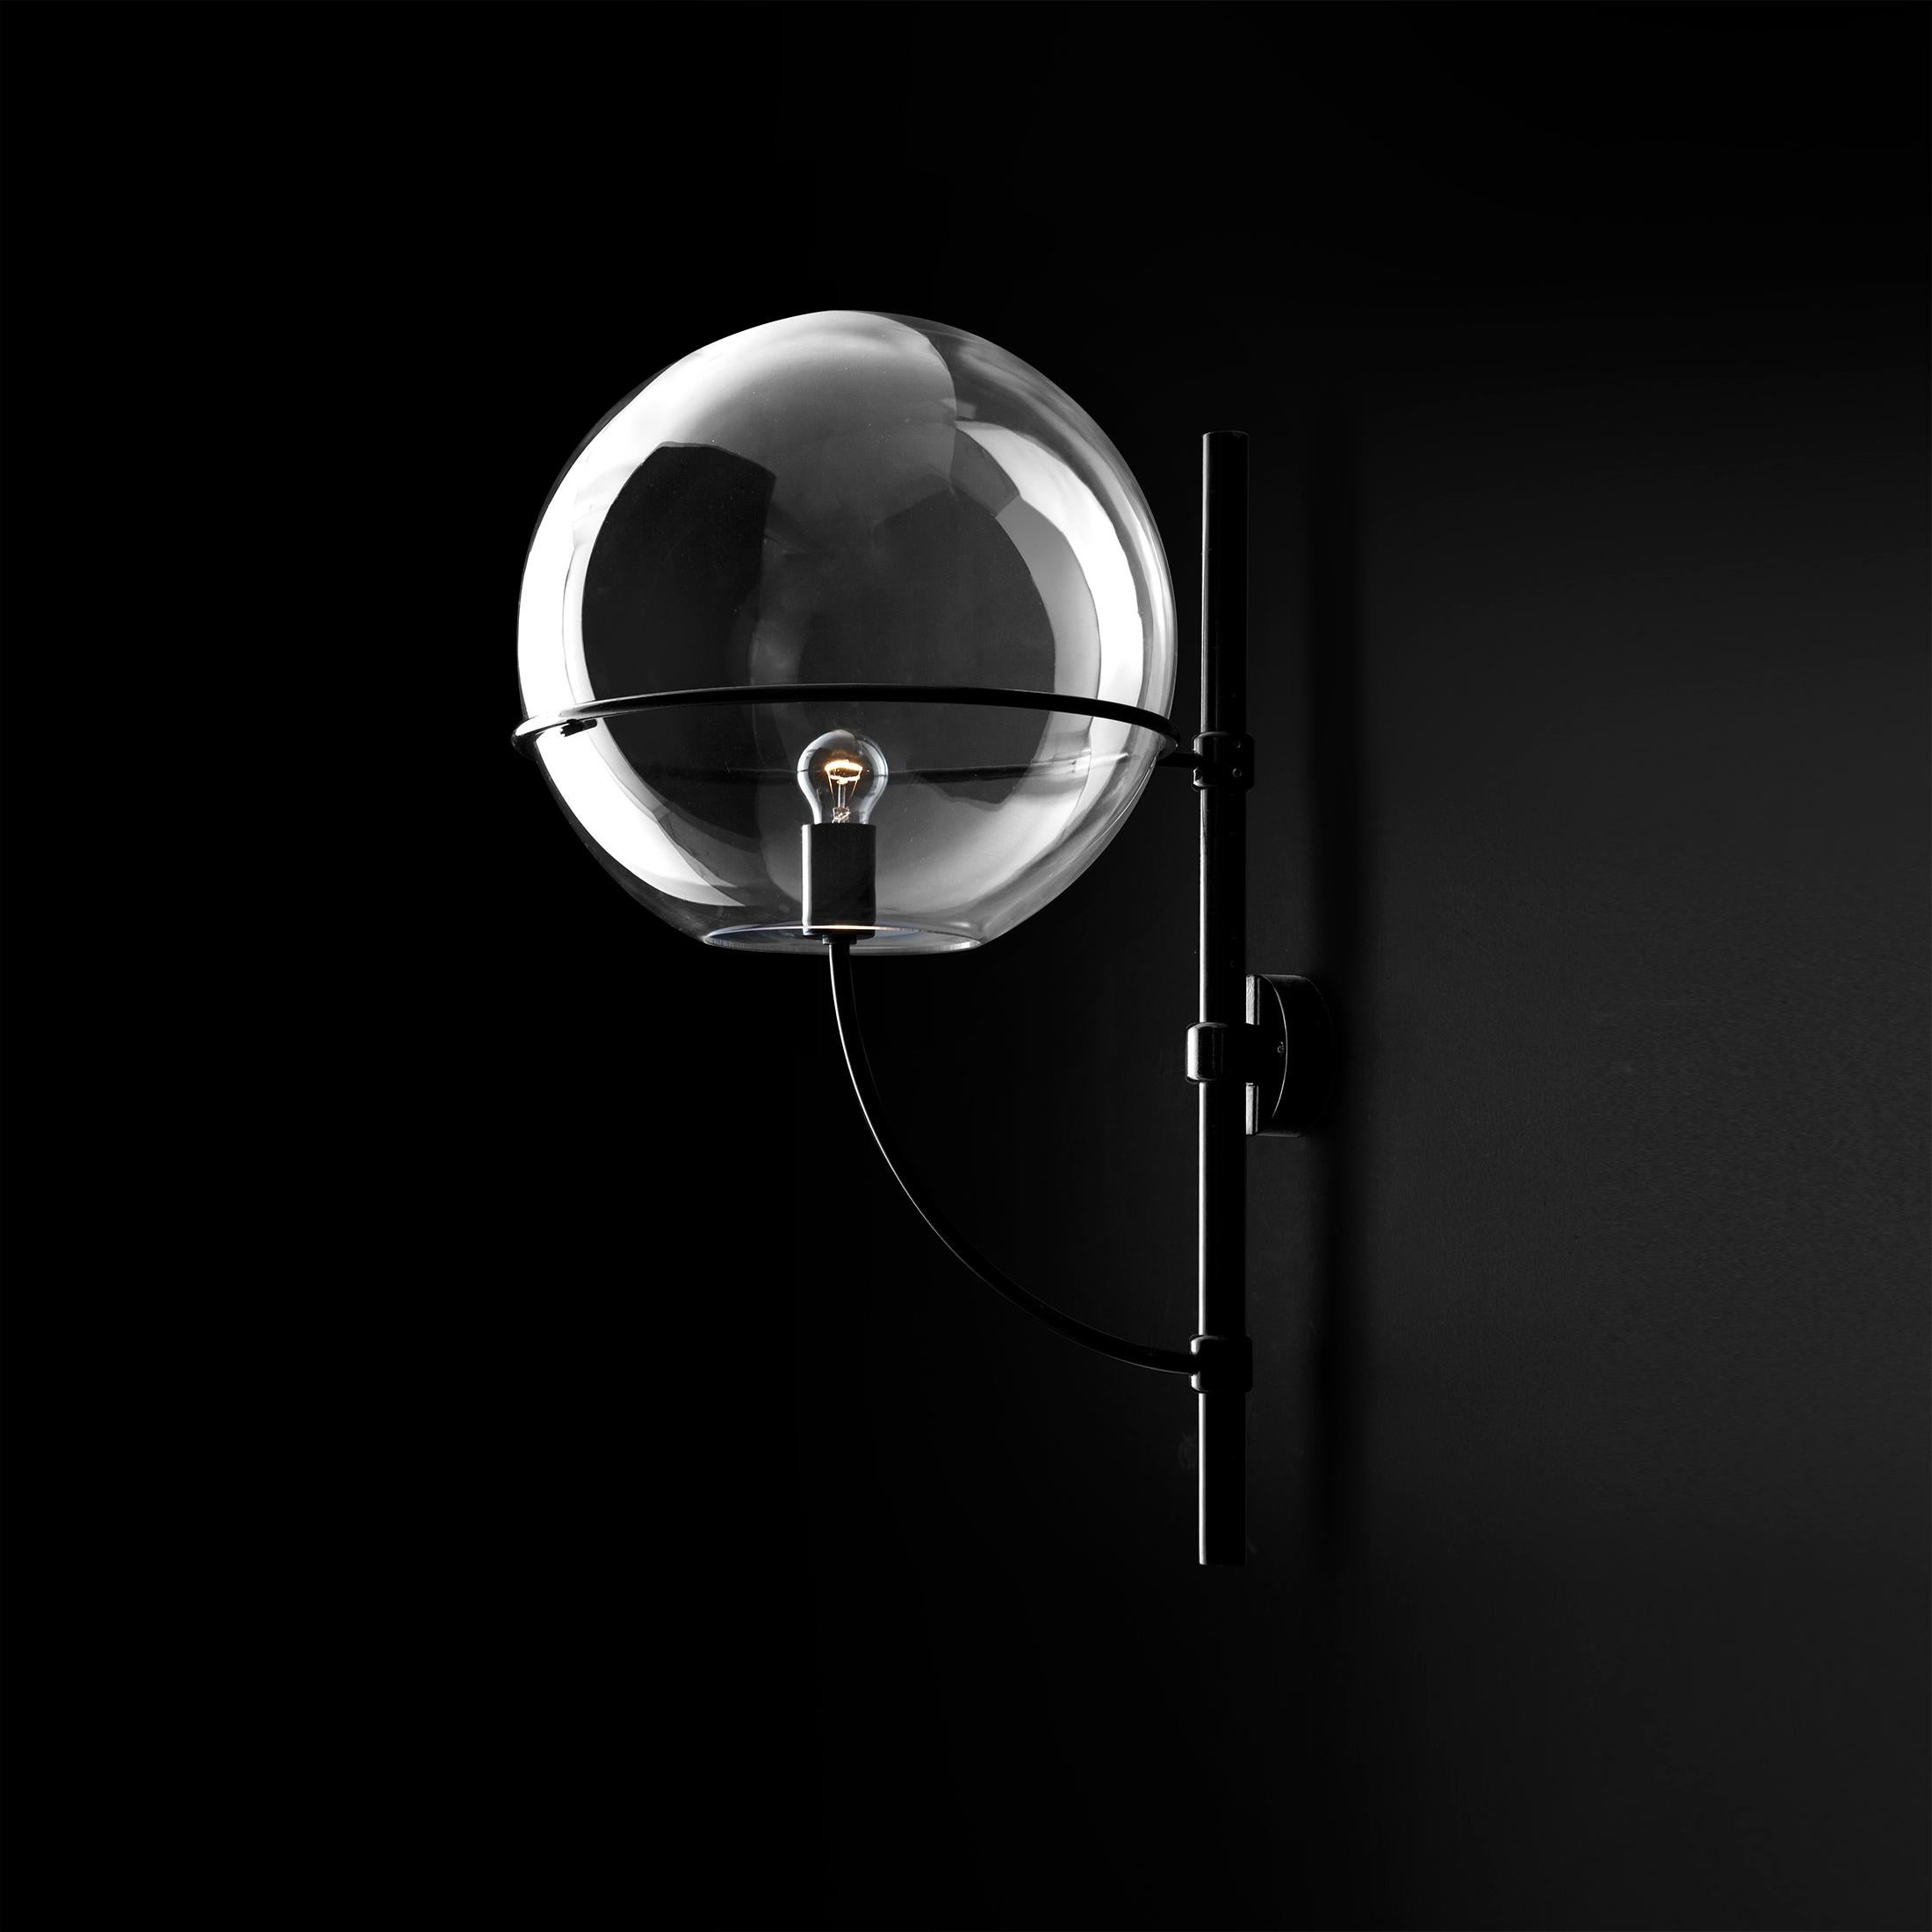 Wall lamp 'Lyndon' designed by Vico Magistretti in 1980.
Outside wall lamp. Zinc-plated and black lacquered metal structure, globes in transparent polycarbonate. Manufactured by Oluce, Italy.

Lyndon is a project by Vico Magistretti created in